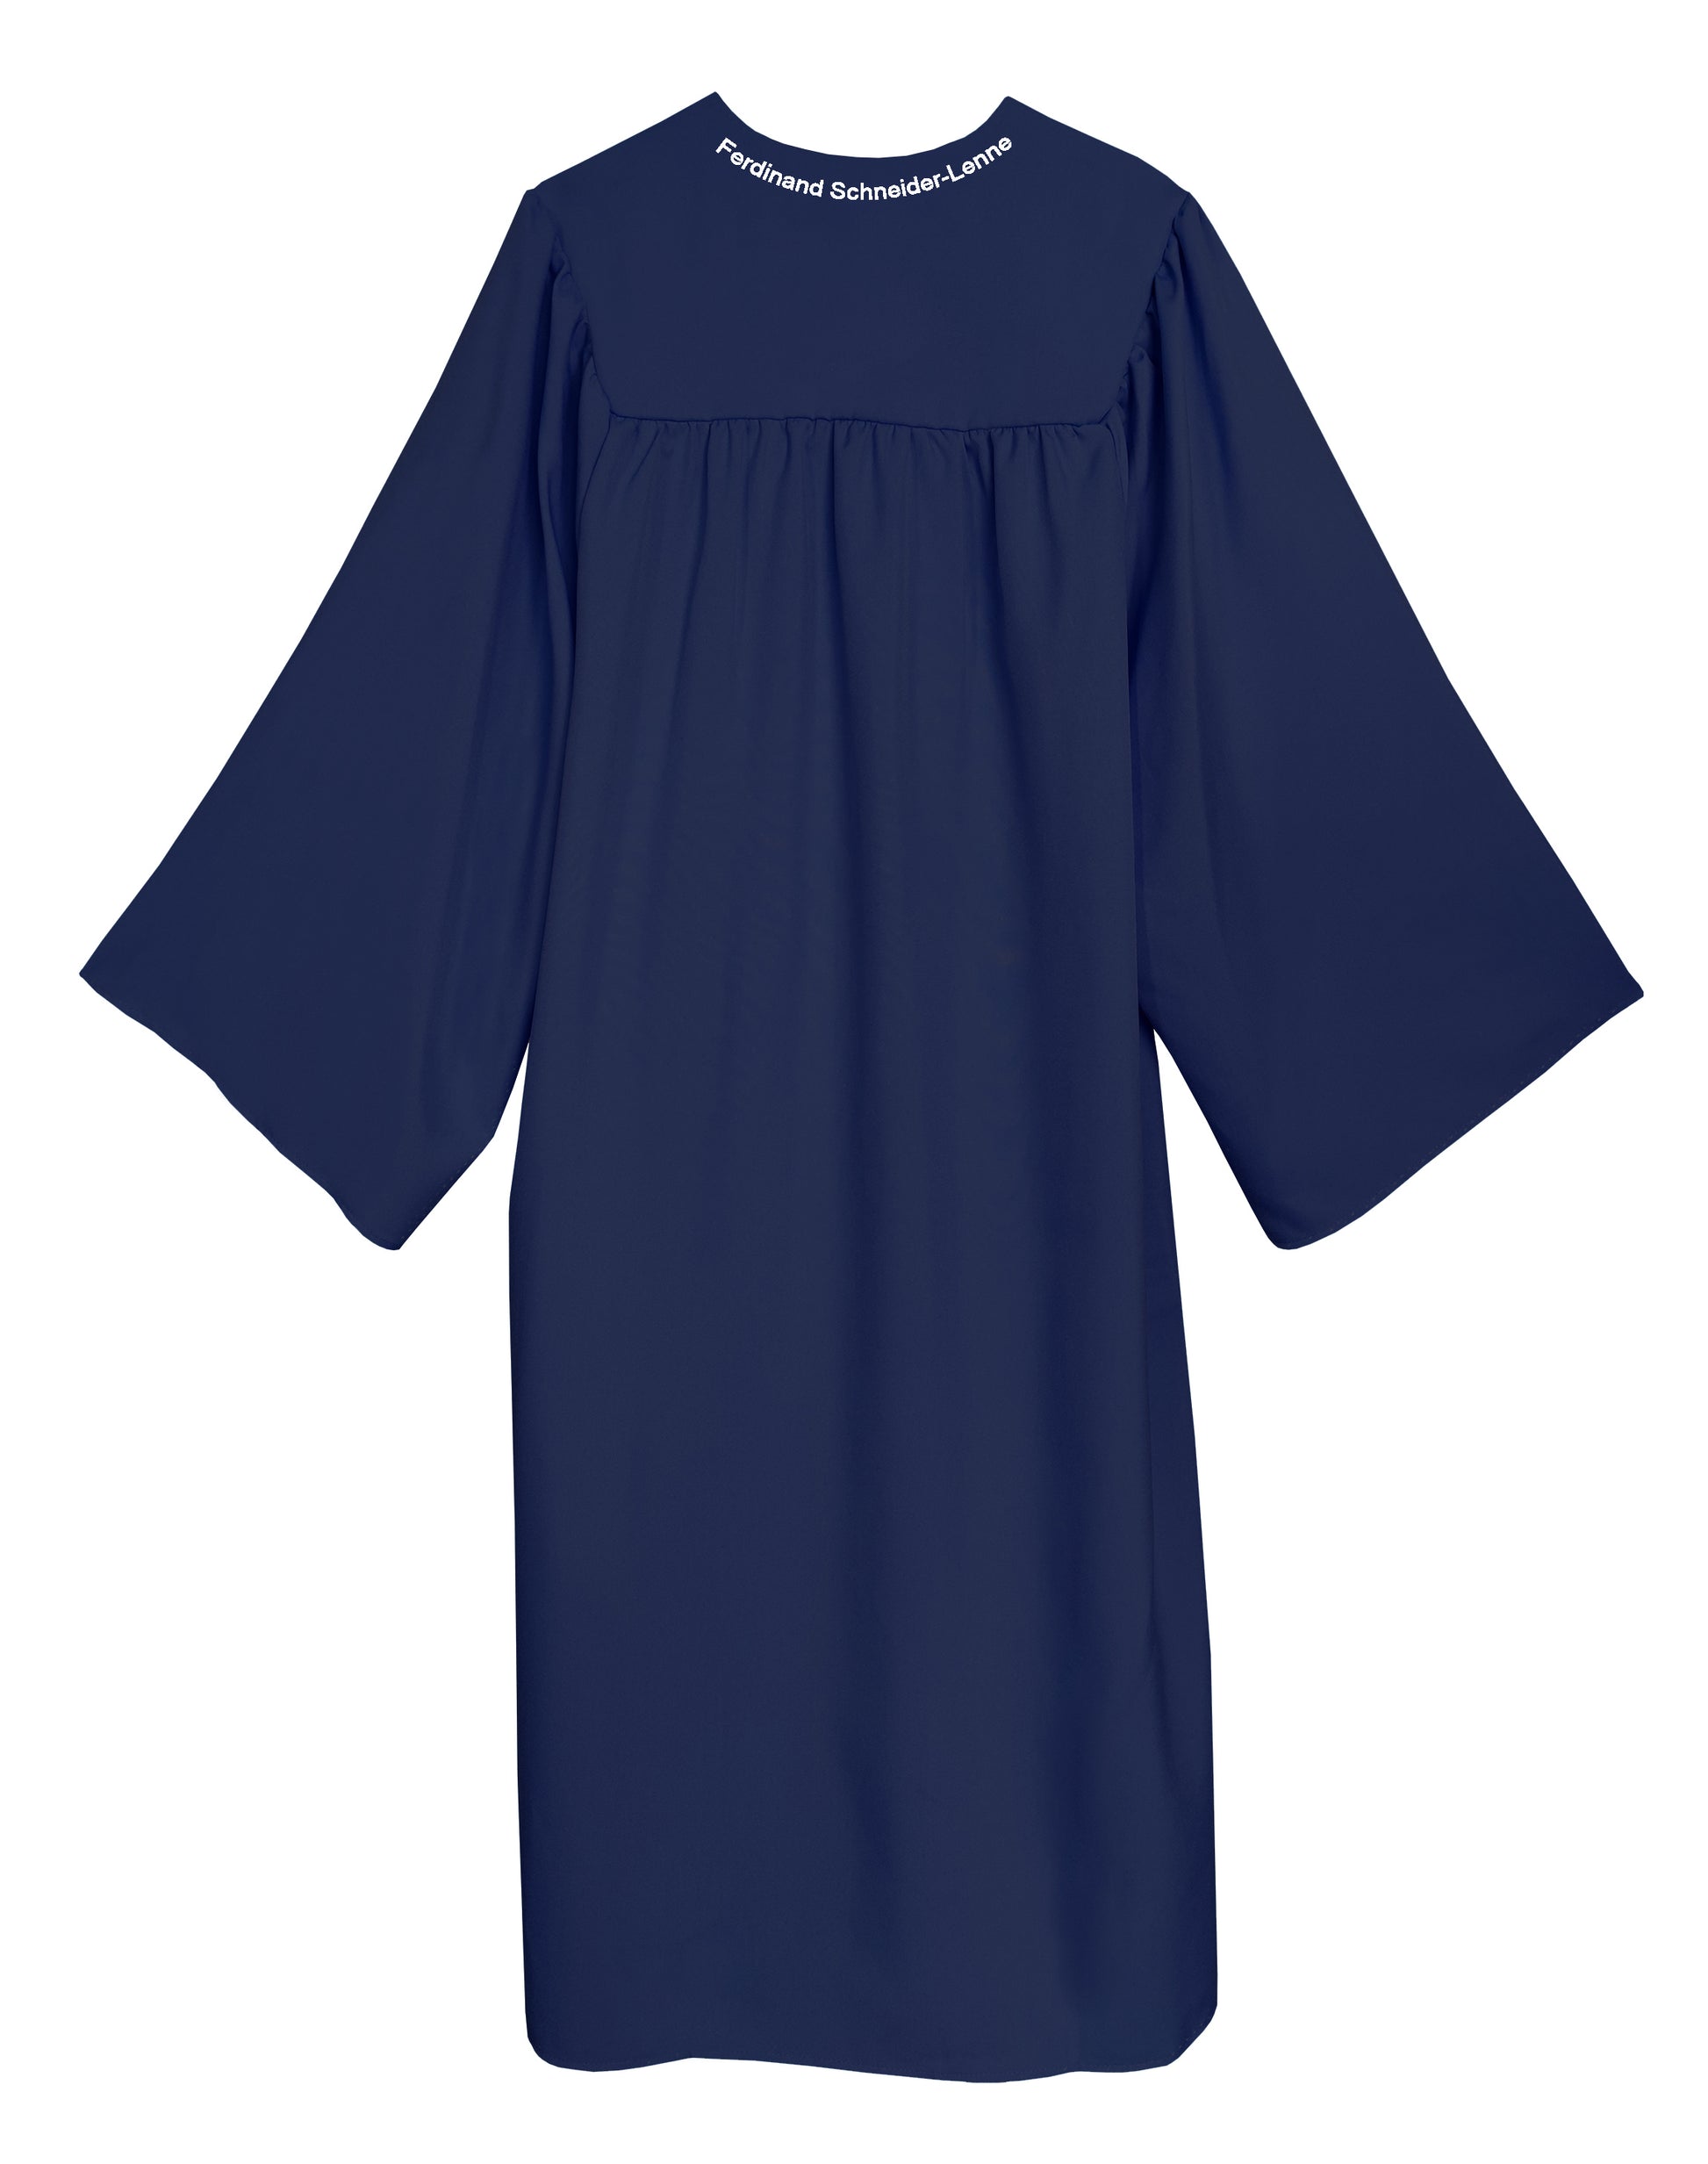 Customized Graduation Gowns for Different Degrees